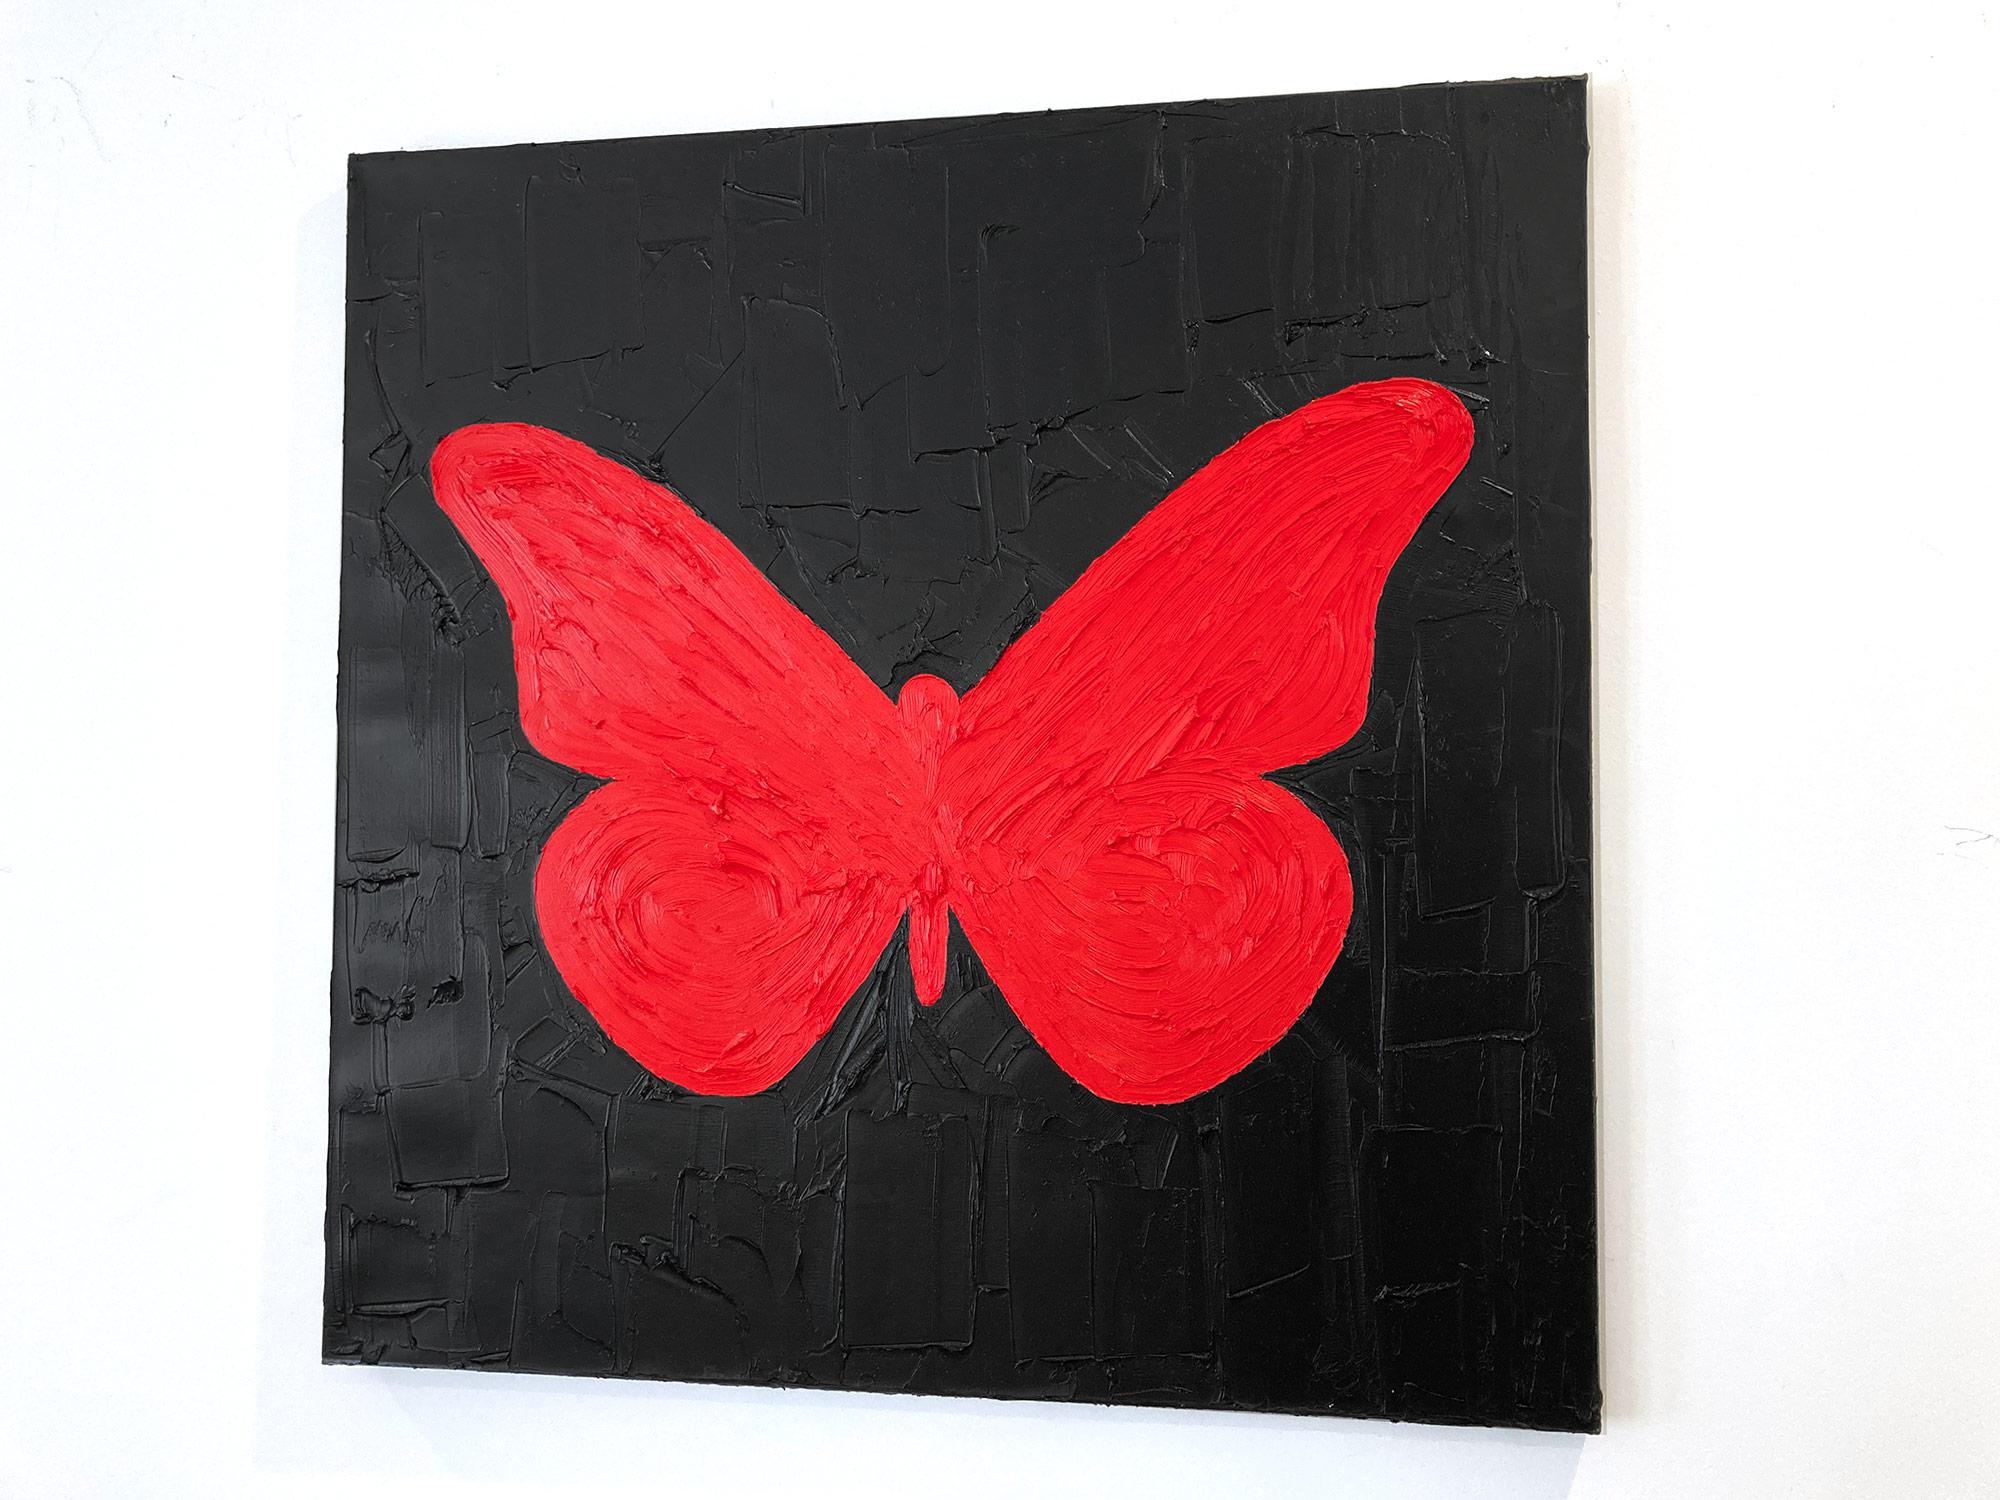 Motivated by bold color and fast brushwork, we are moved by the simplicity and thick textured oil paints in these works. Shaoul’s “My Butterfly Collection” is a vibrant and energetic display of transformation encapsulated in large canvases, leaving